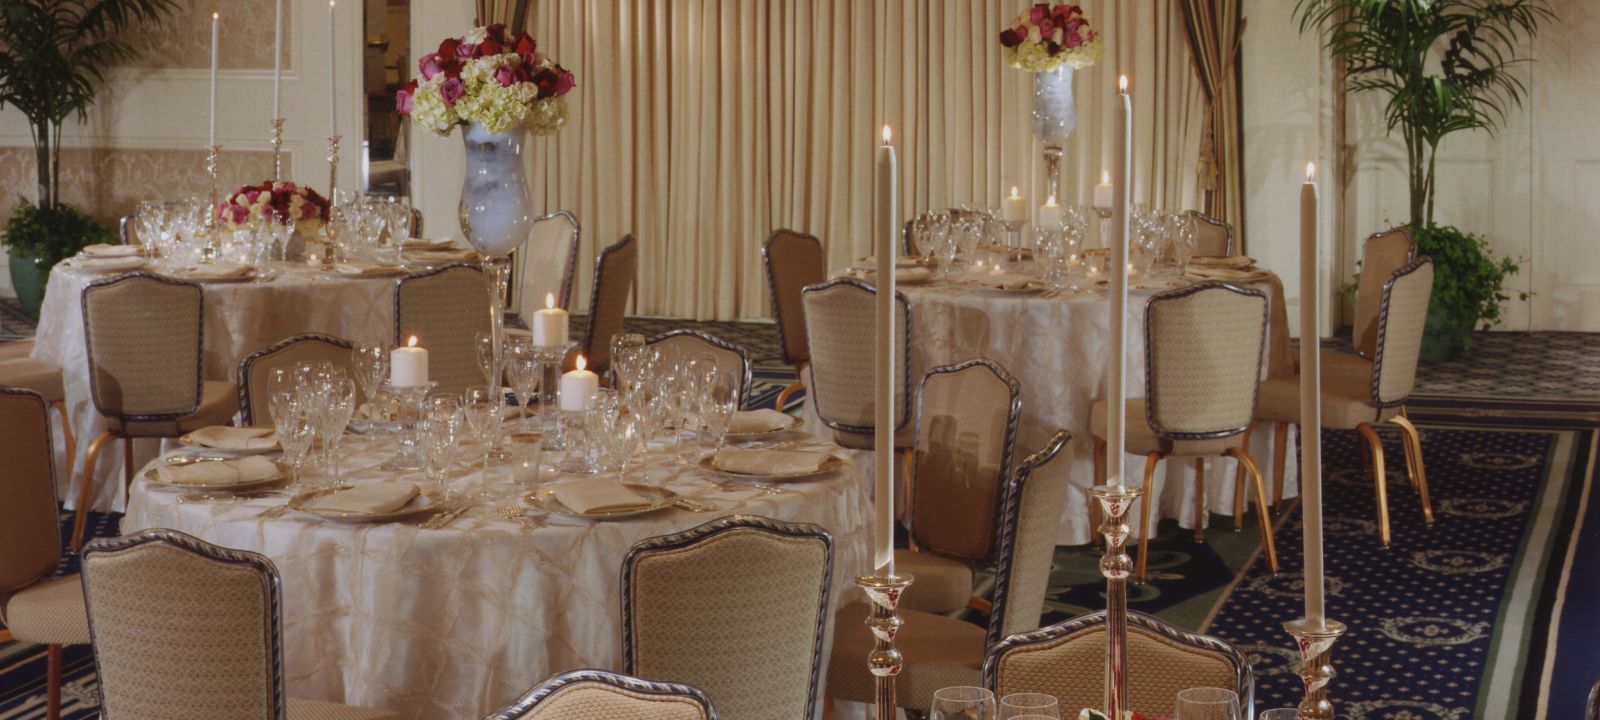 The Colonnade Hotel event space setup for a banquet or wedding